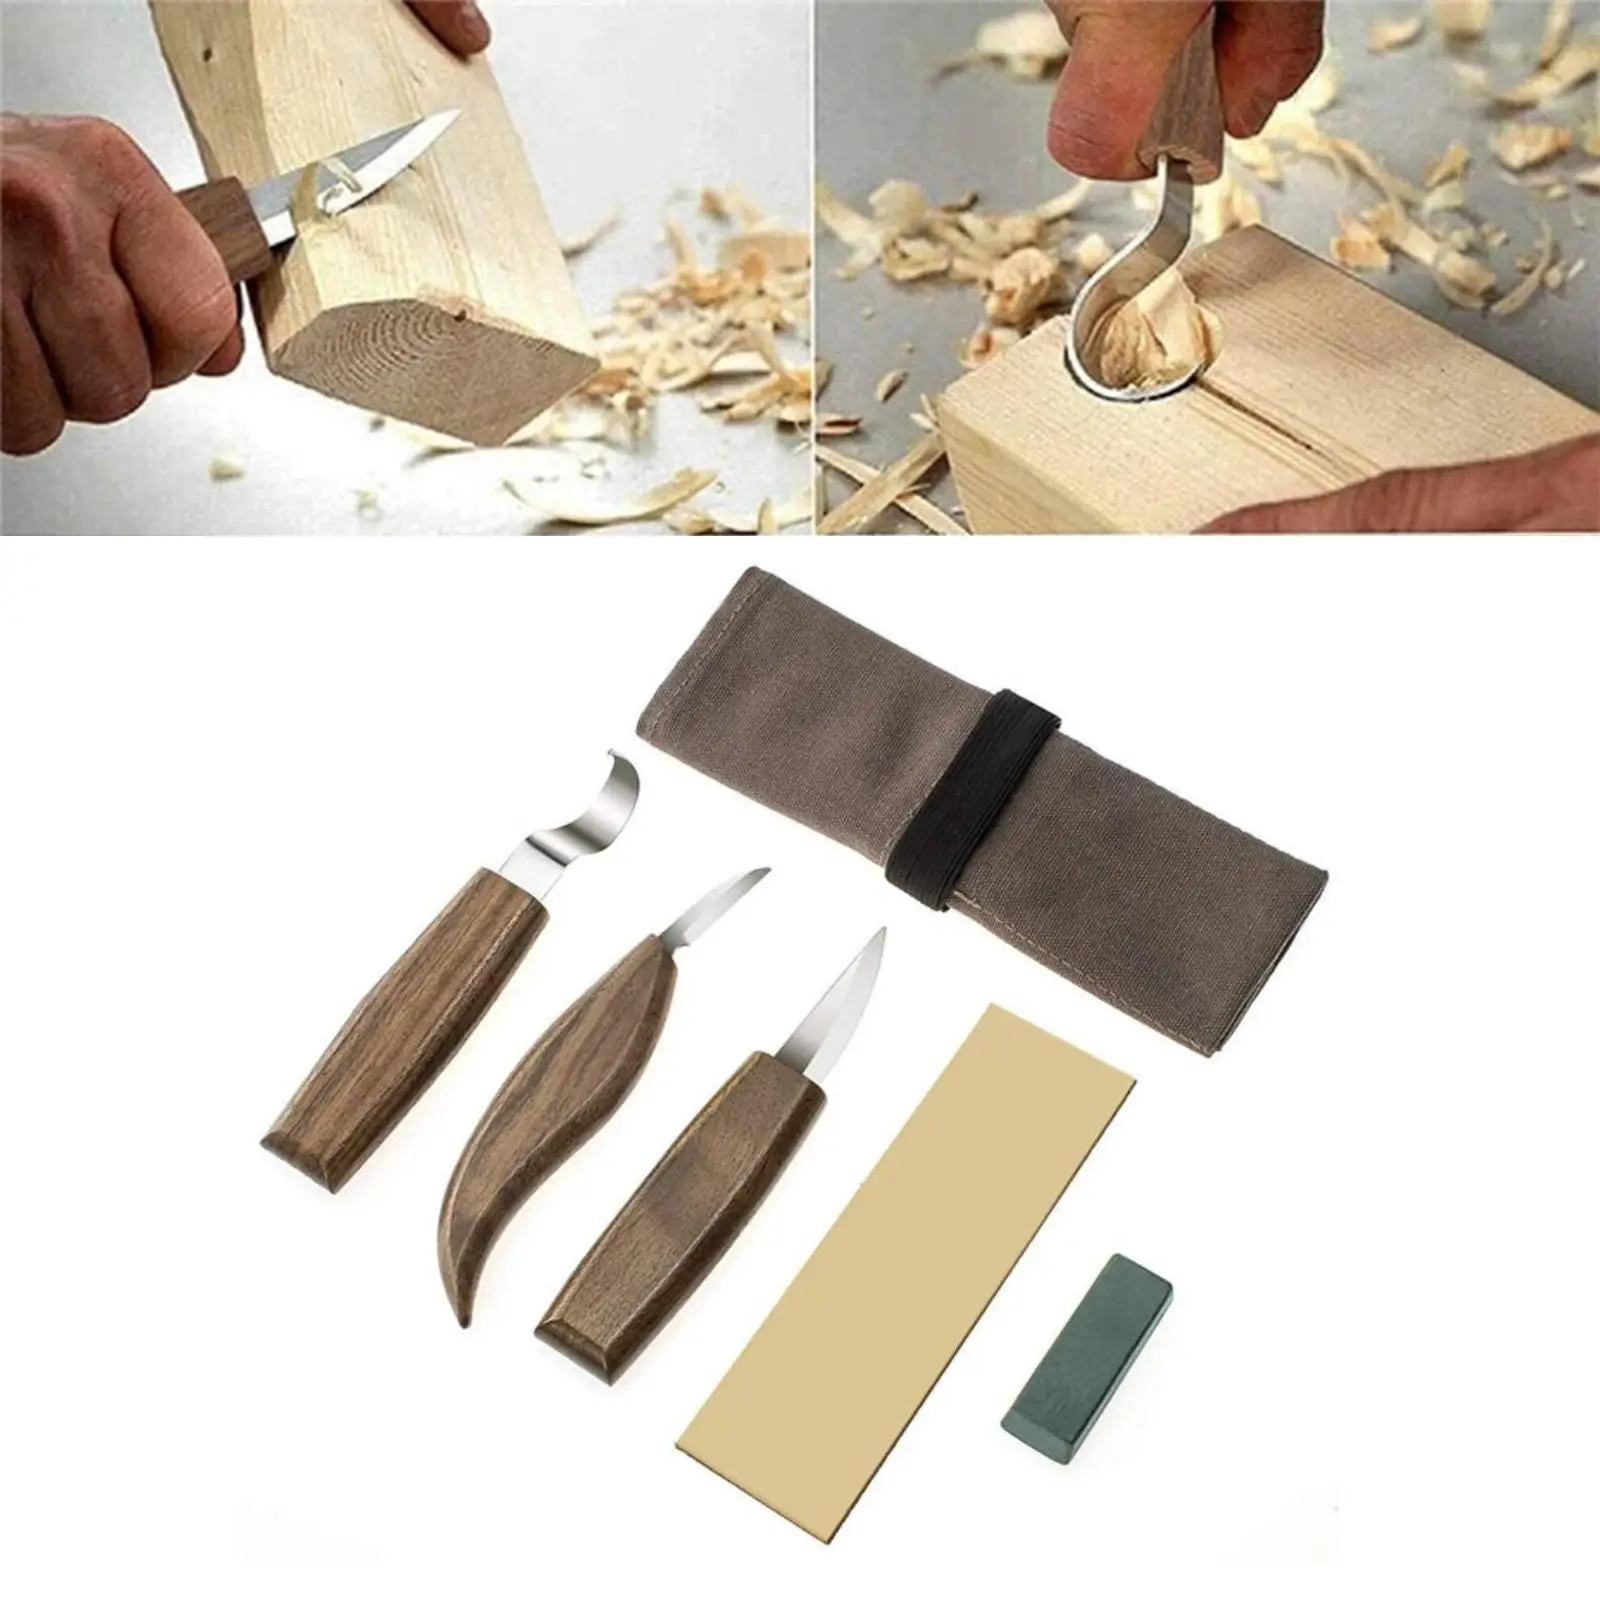 Professional Wood Carving Whittling  Set Woodworking Crafts DIY Adults